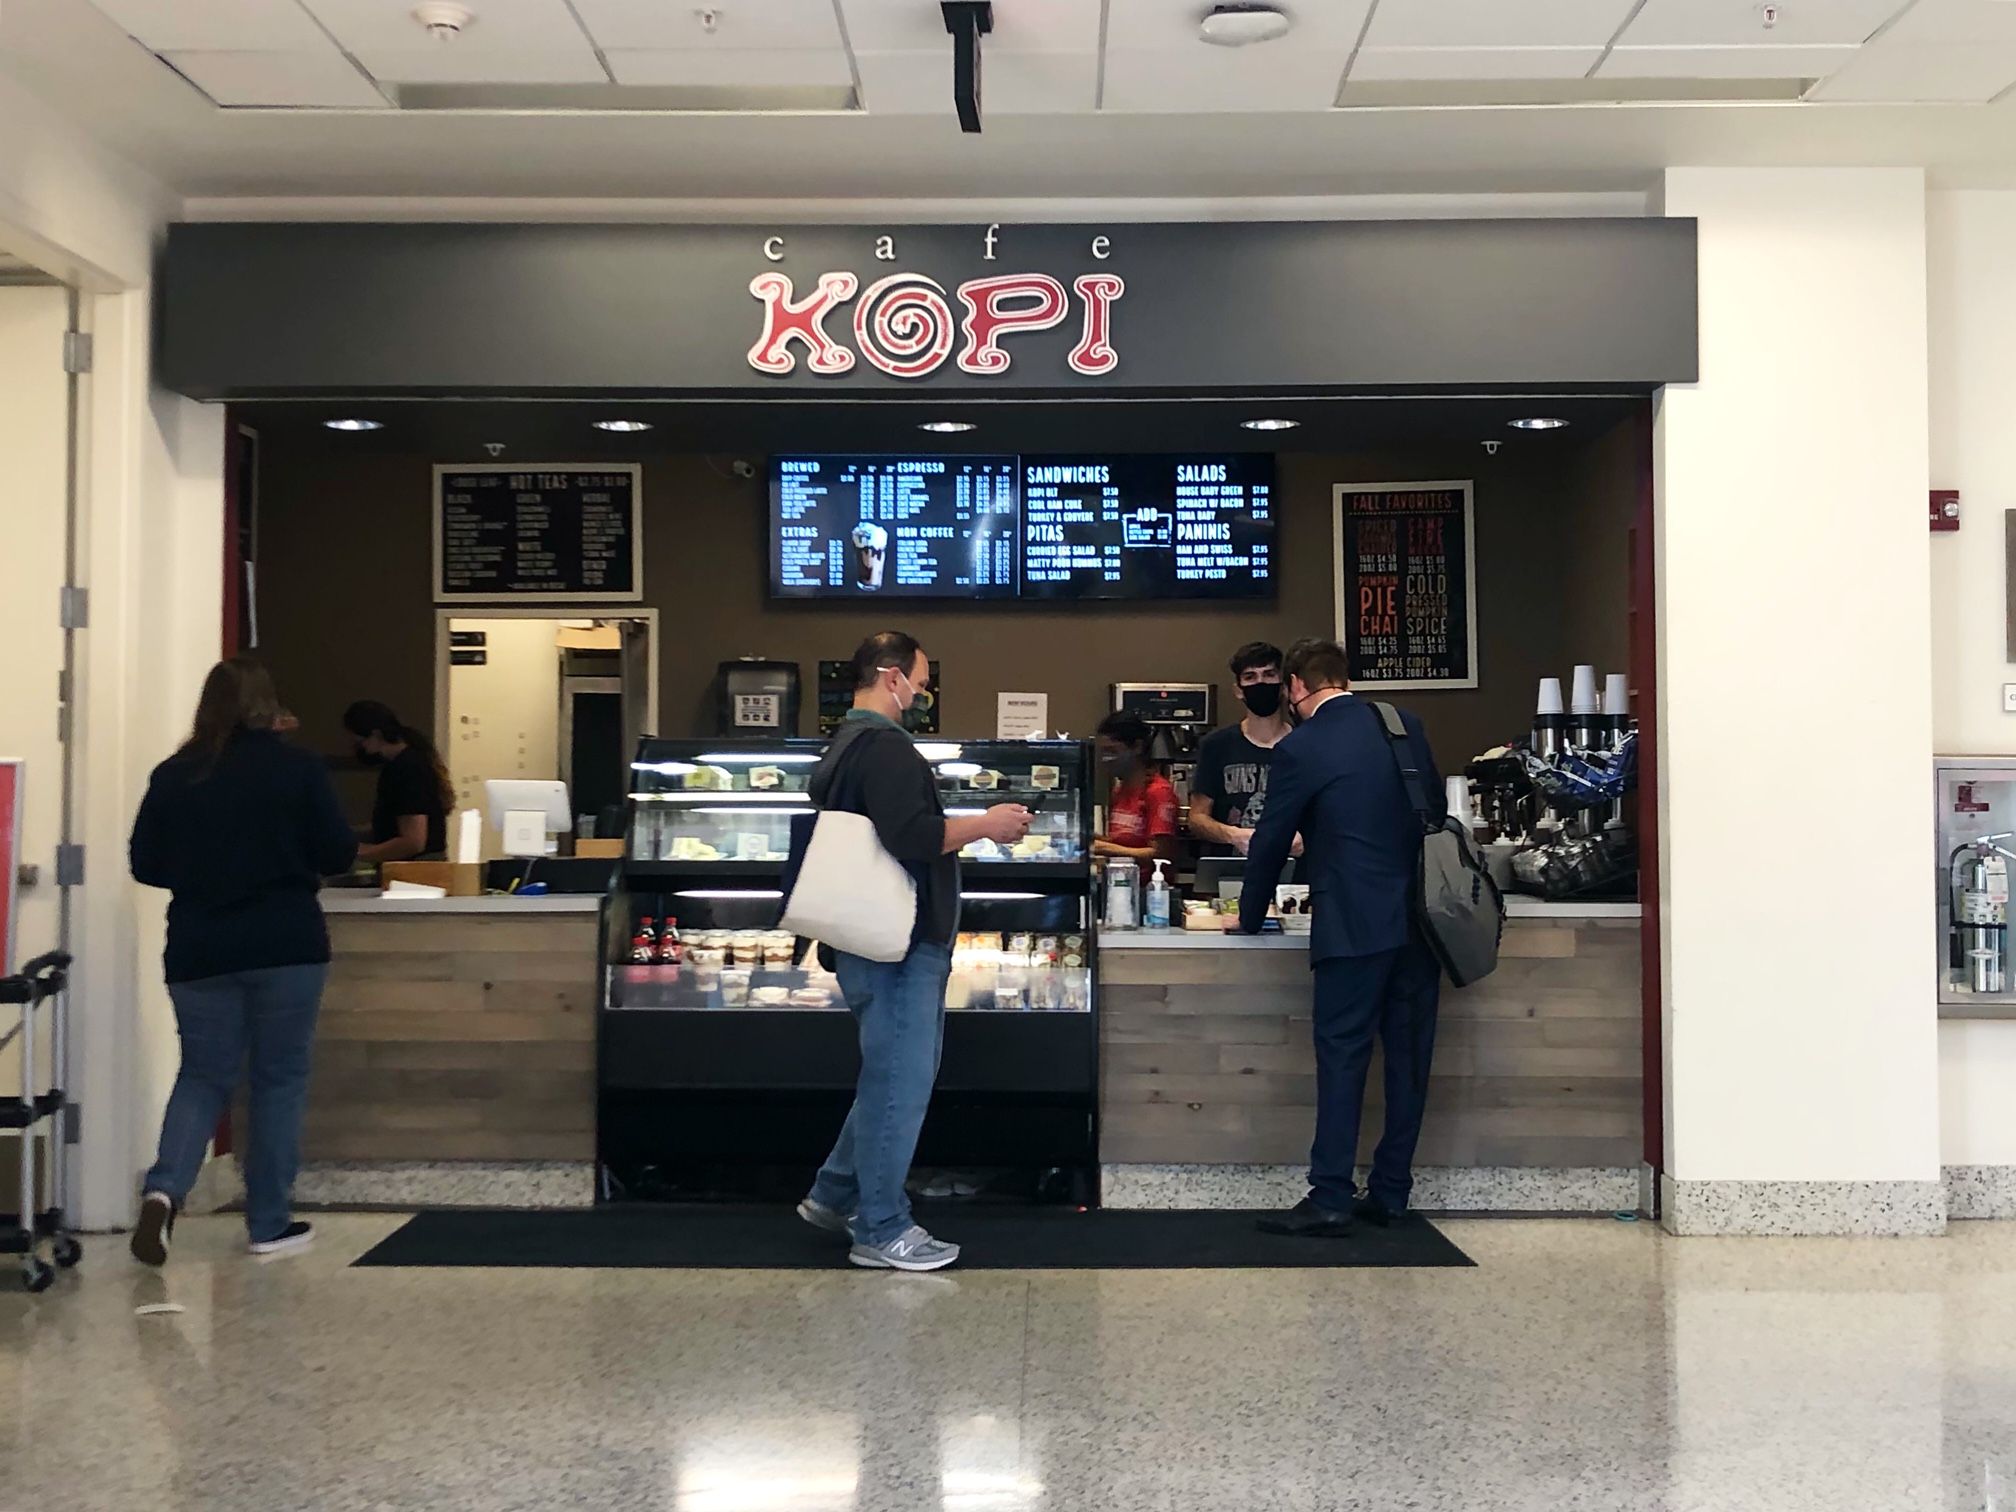 The campus location of Cafe Kopi has a black restaurant sign above where three white partons are ordering coffee and lunch inside the BIF at U of I. Photo by Alyssa Buckley.